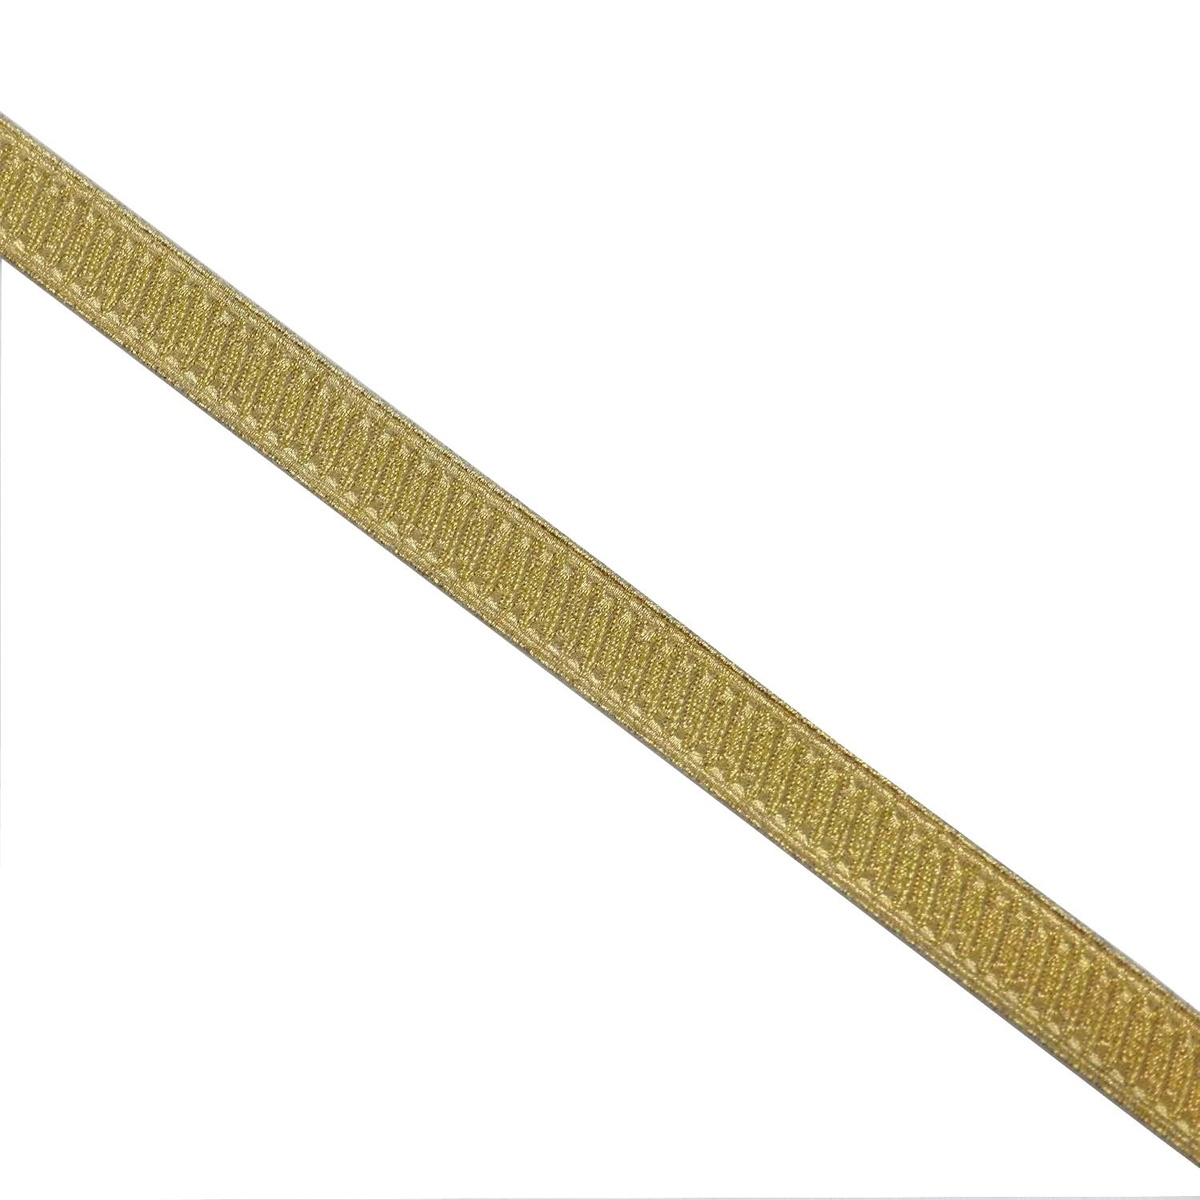 Baton 13 mm double face gold braid, ancient stock, made in France, price per roll.